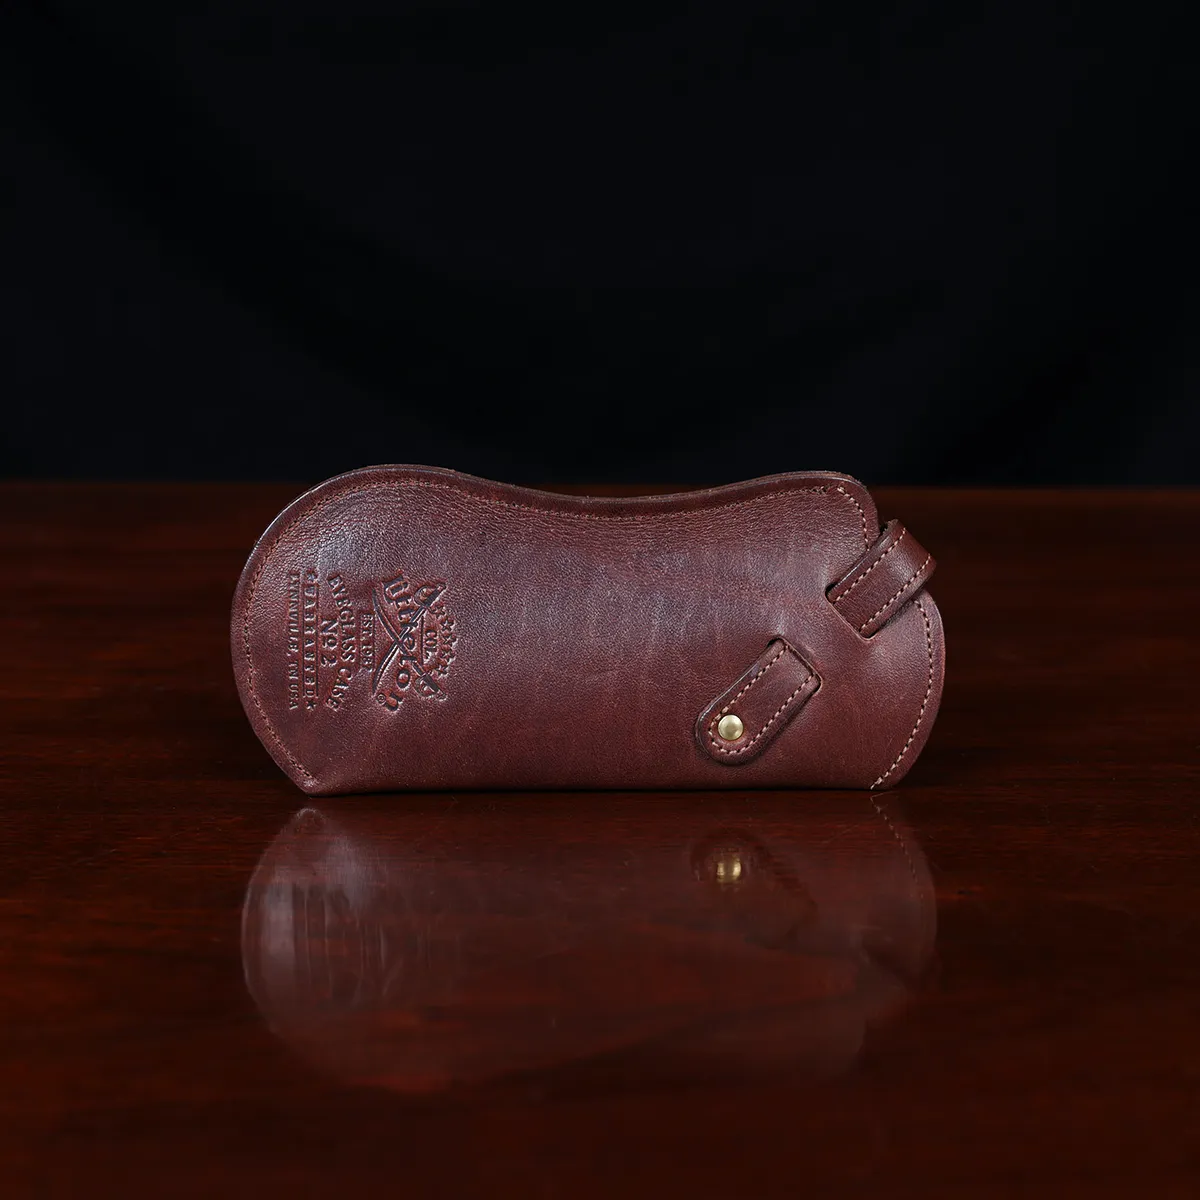 Leather Eyeglass Case No. 2 Reading Glasses, Best & USA Made